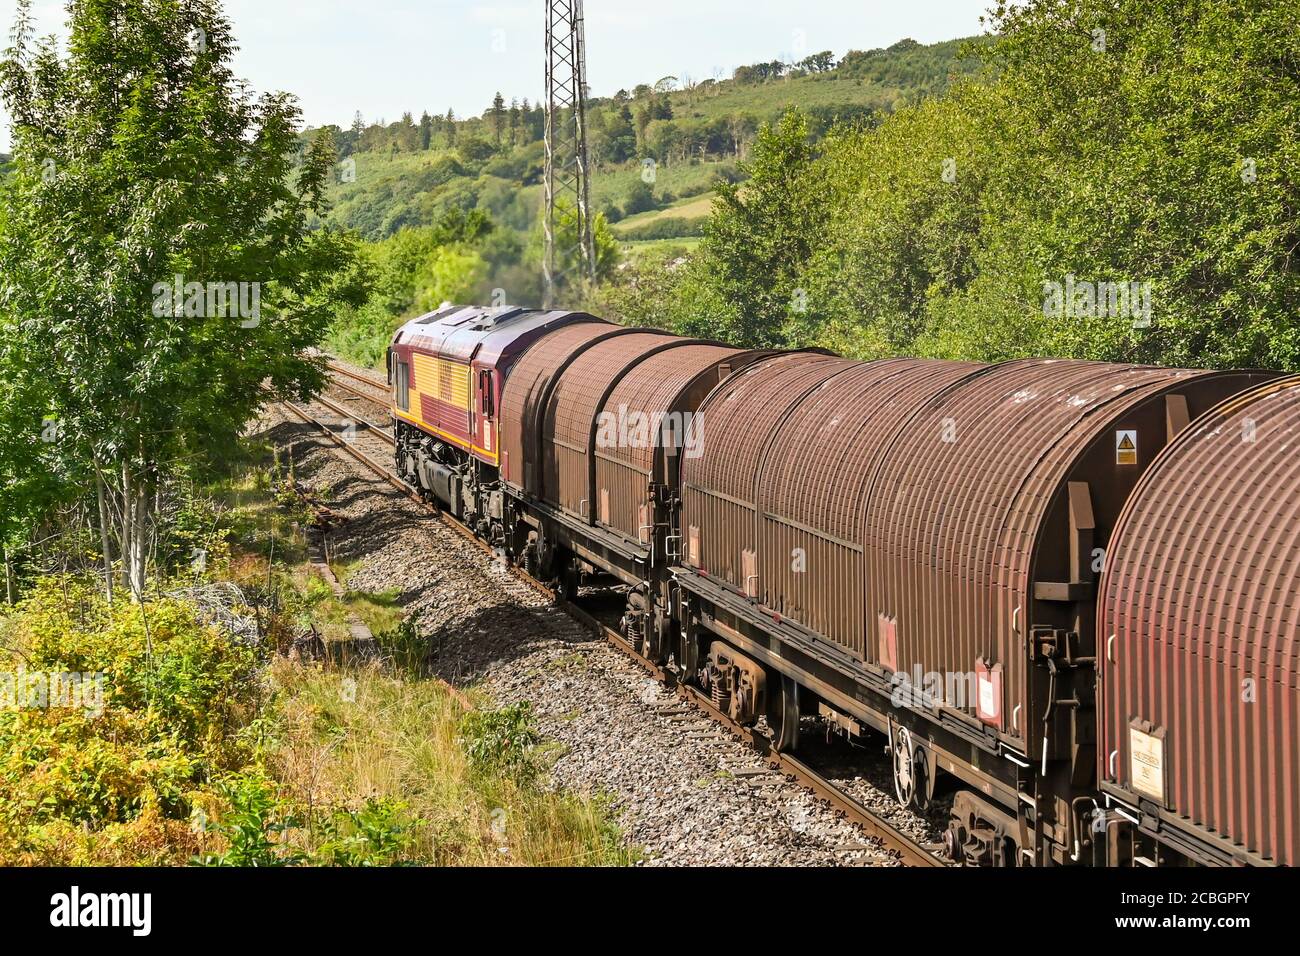 Pontyclun, Wales - August 2020: Heavy diesel locomotive pulling a freight train with covered wagons Stock Photo